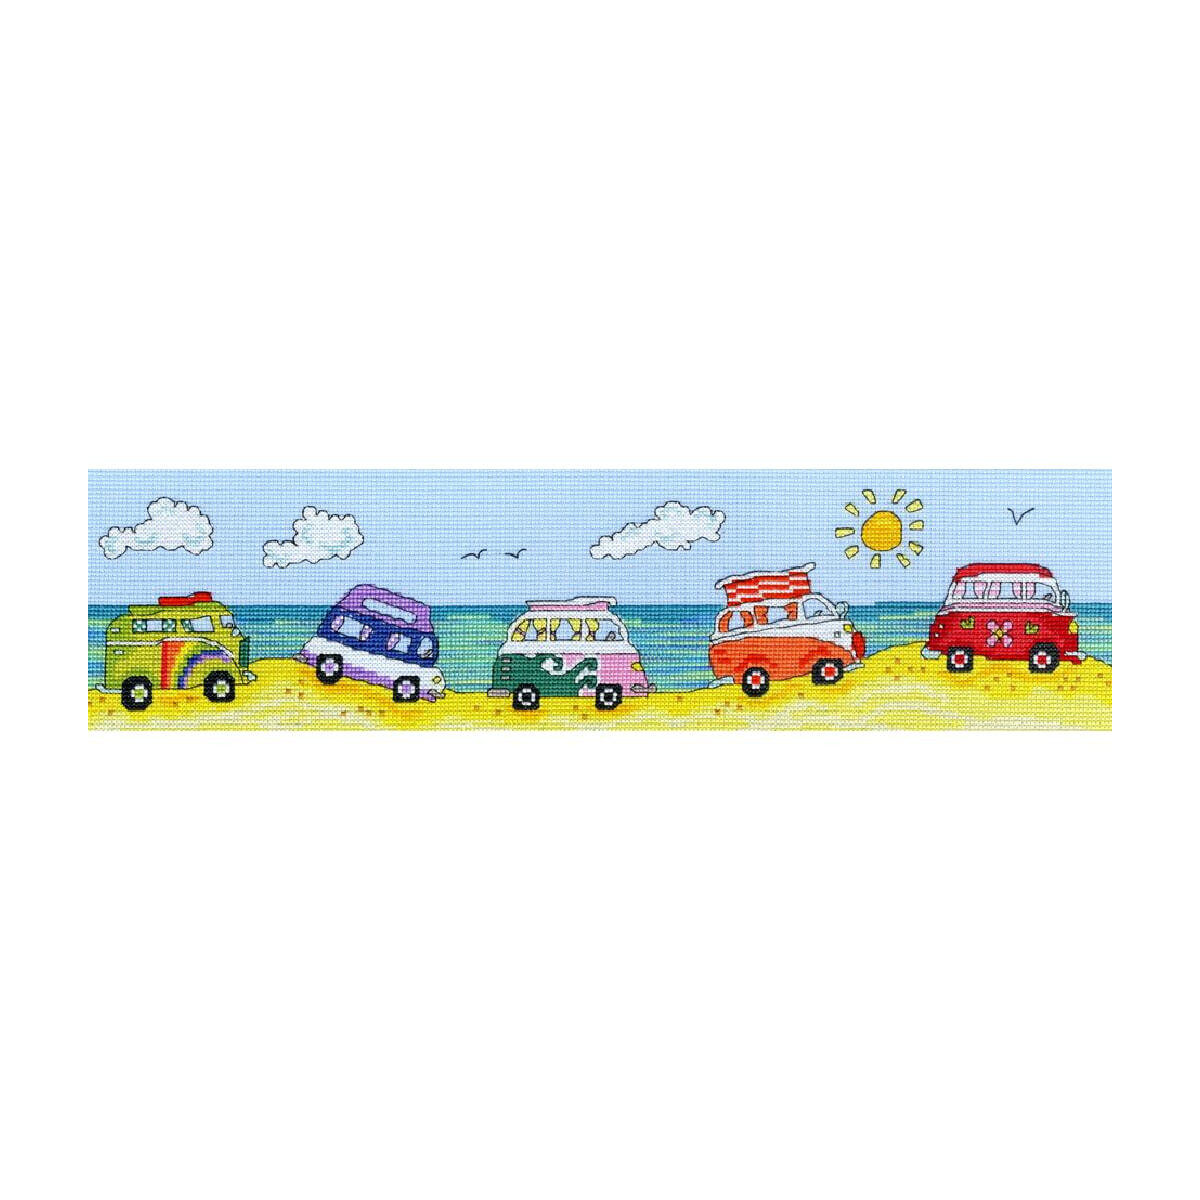 Illustration of a beach scene with six colorful vans...